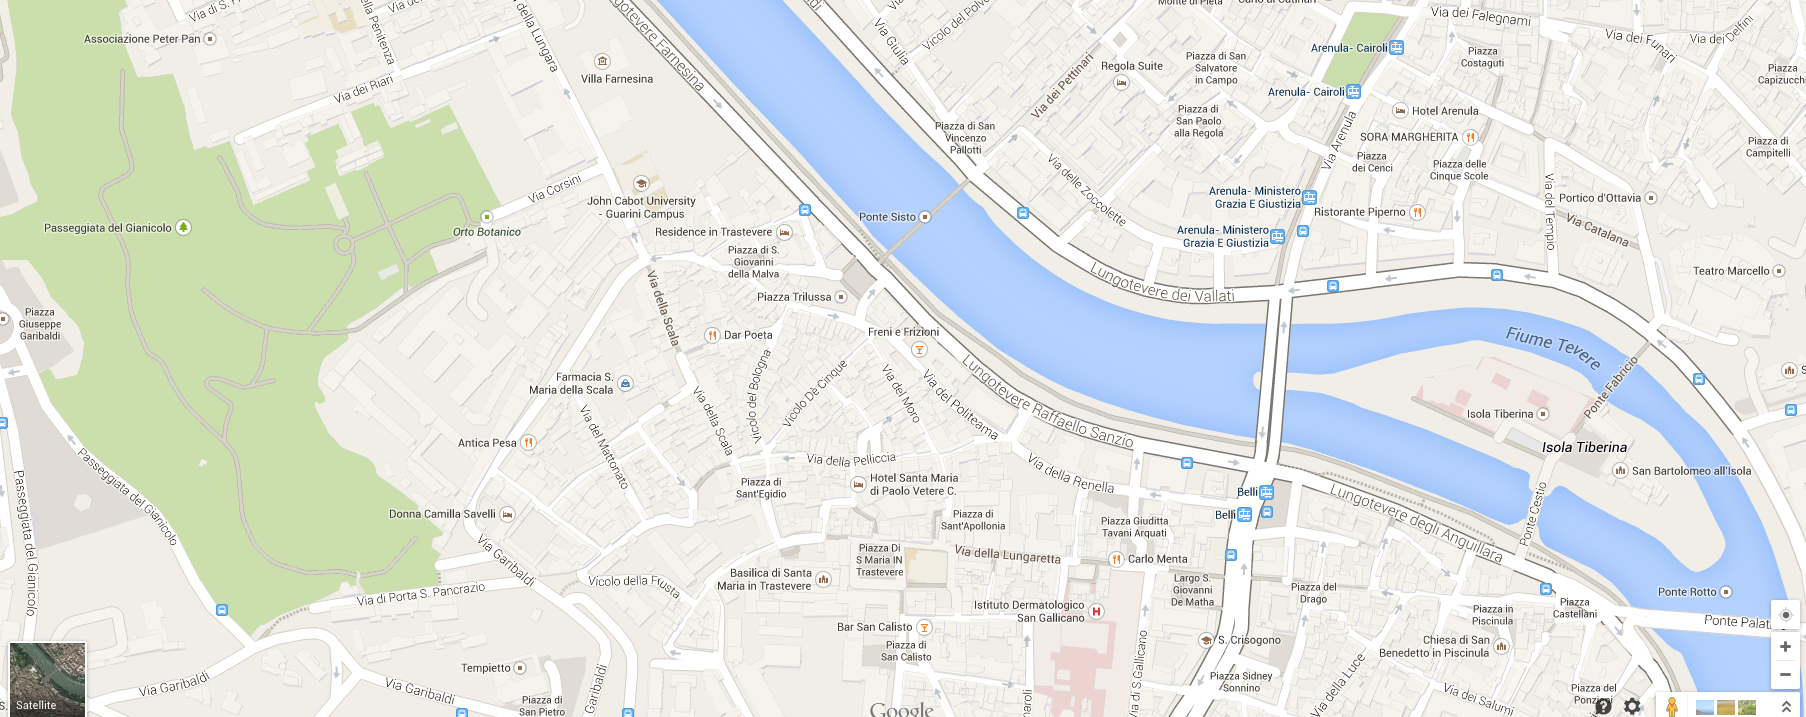 Map of the northern section of Trastevere.